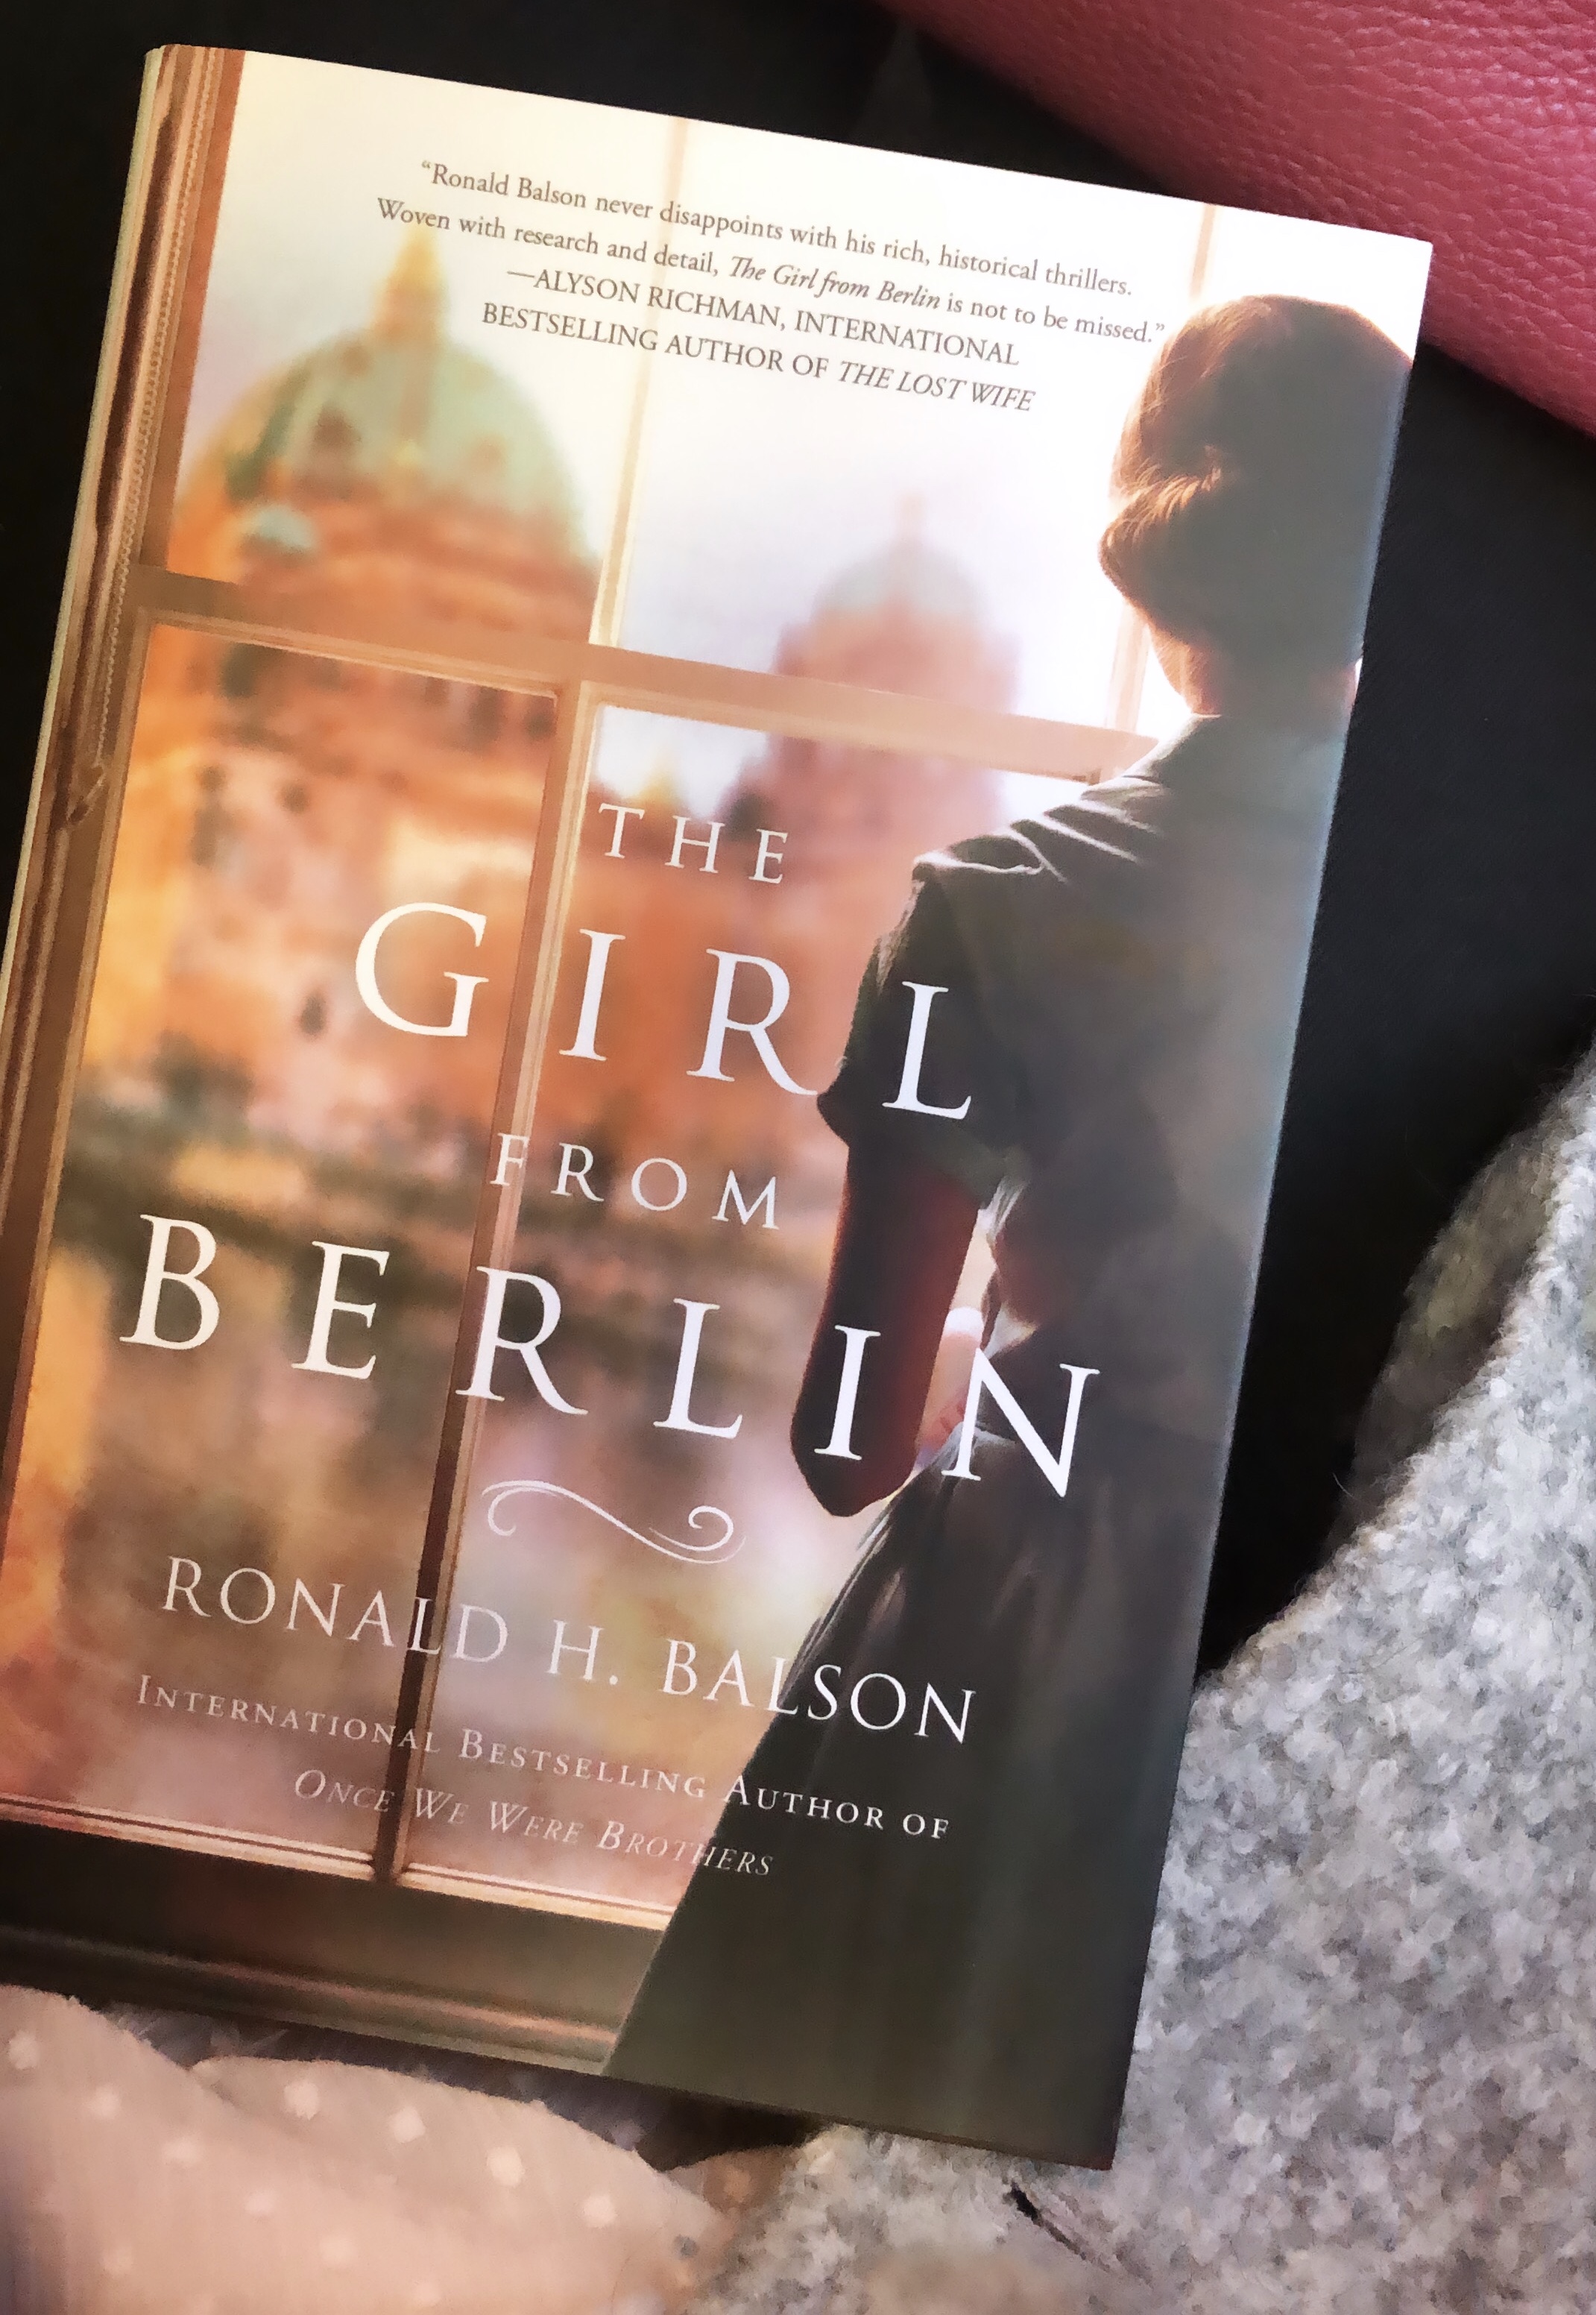 Book Review – The Girl From Berlin by Ronald H. Balson